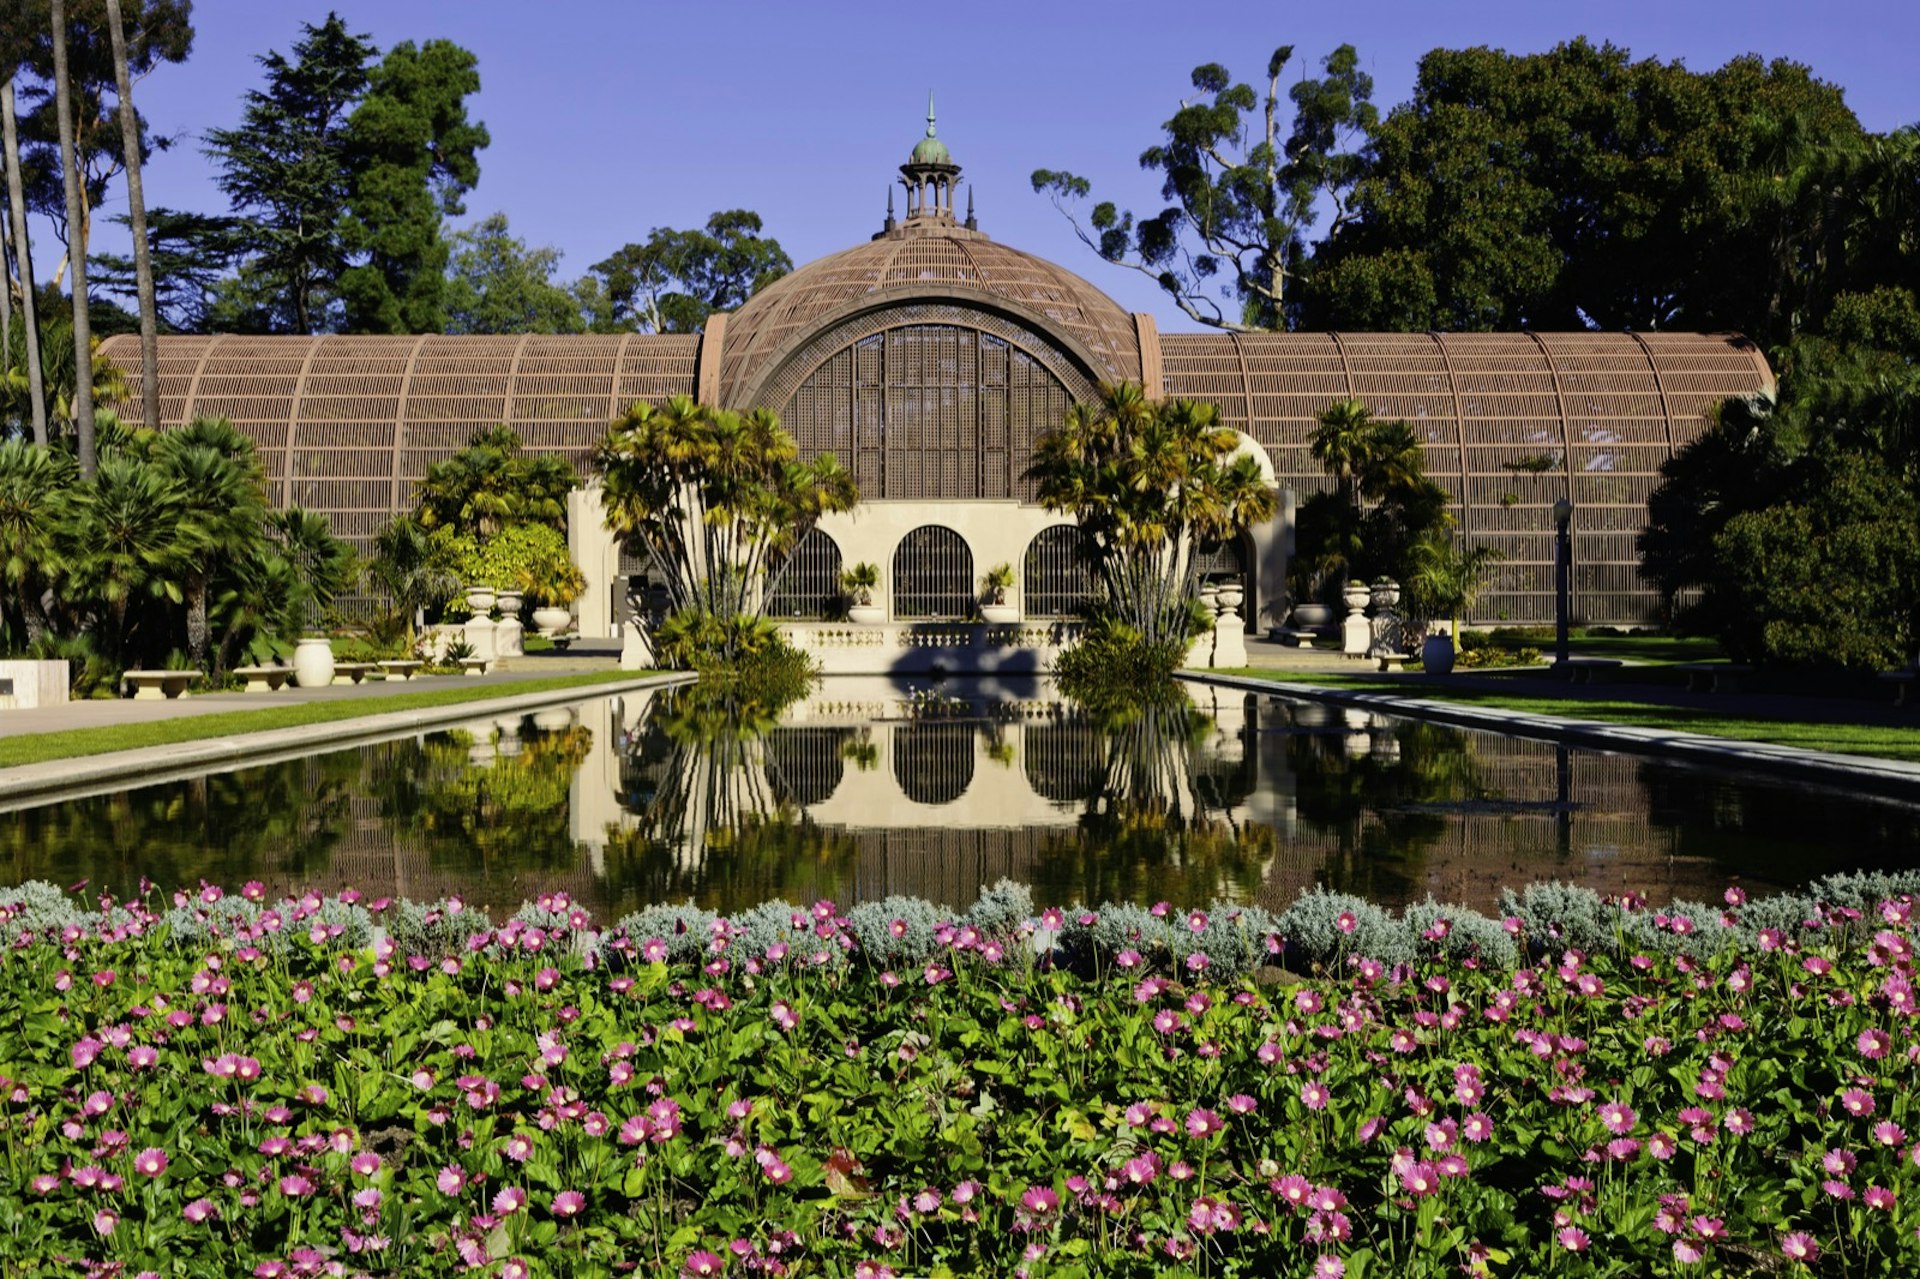 A domed building in lath is mirrored in the lily pond stretching out in front a great sight on a perfect weekend in San Diego